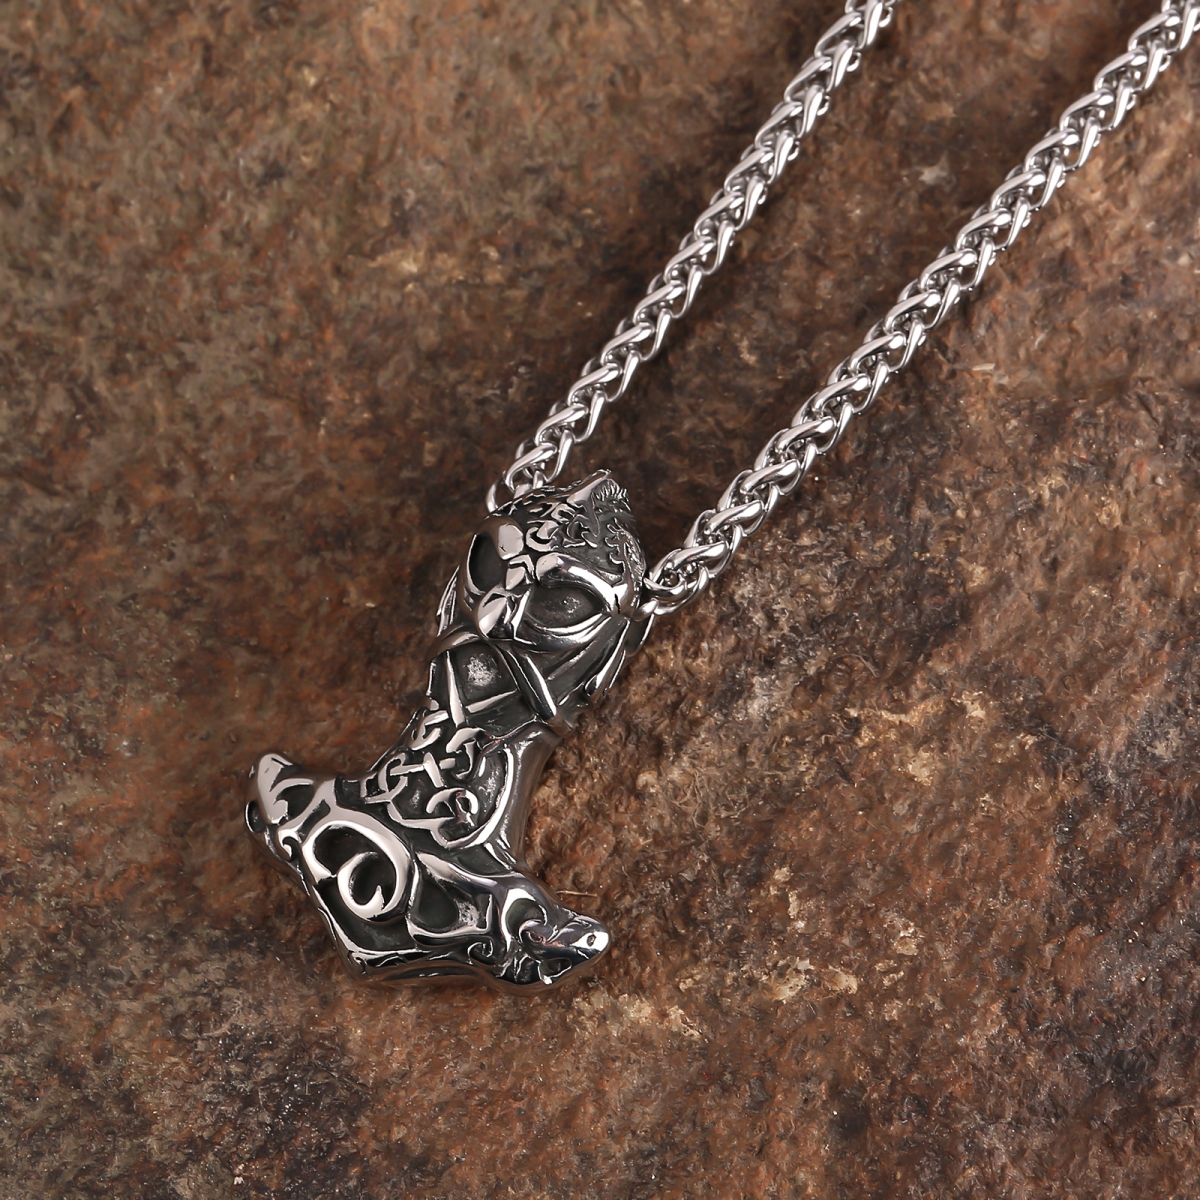 Pagan viking rune necklace-NORSECOLLECTION- Viking Jewelry,Viking Necklace,Viking Bracelet,Viking Rings,Viking Mugs,Viking Accessories,Viking Crafts